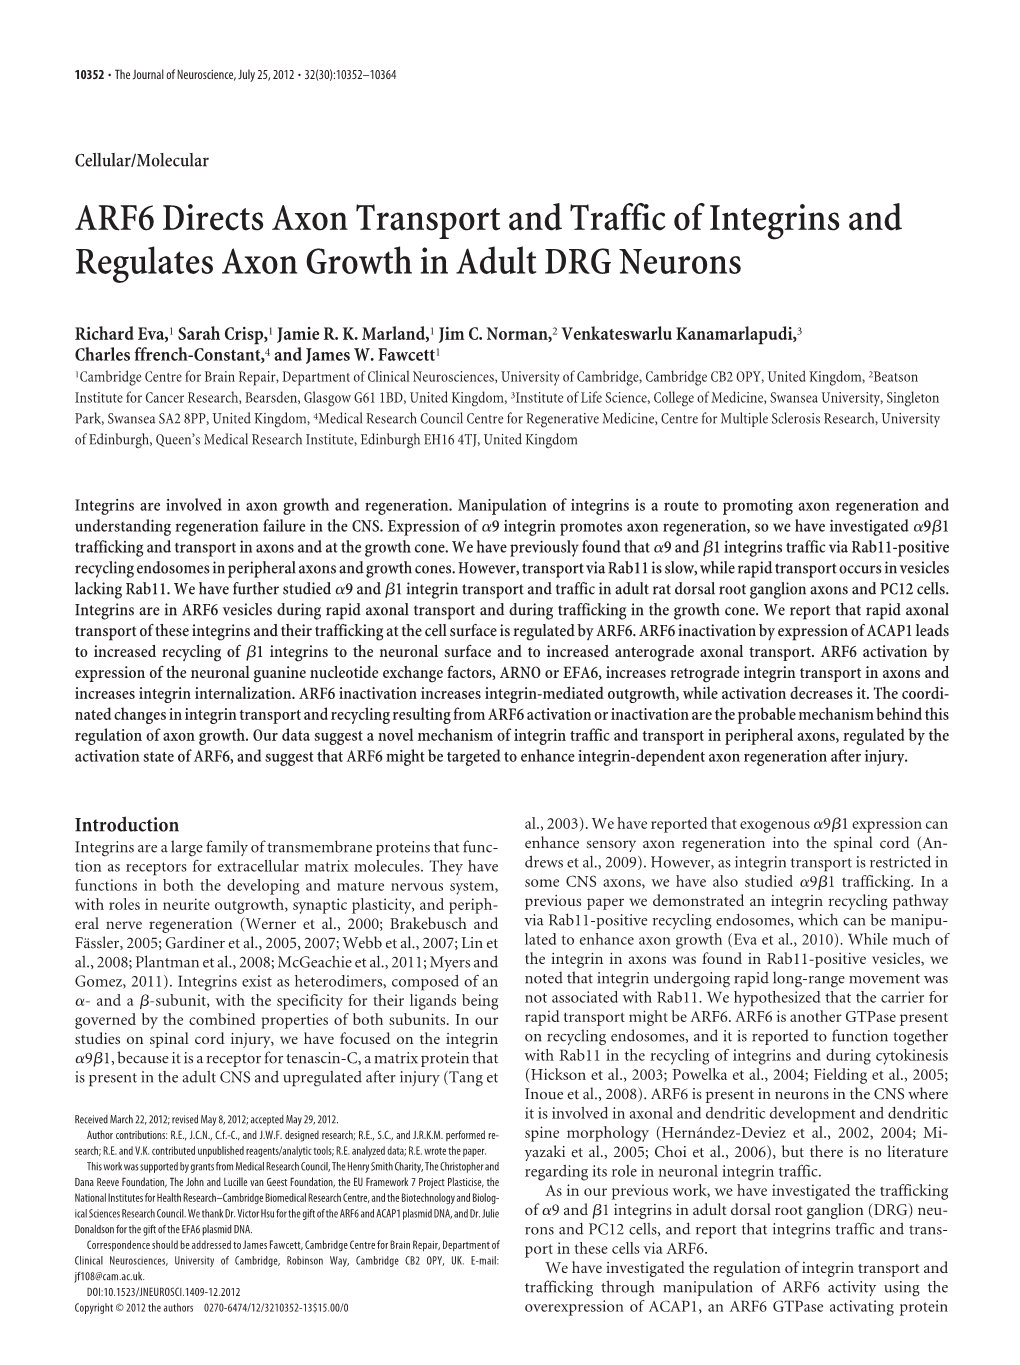 ARF6 Directs Axon Transport and Traffic of Integrins and Regulates Axon Growth in Adult DRG Neurons